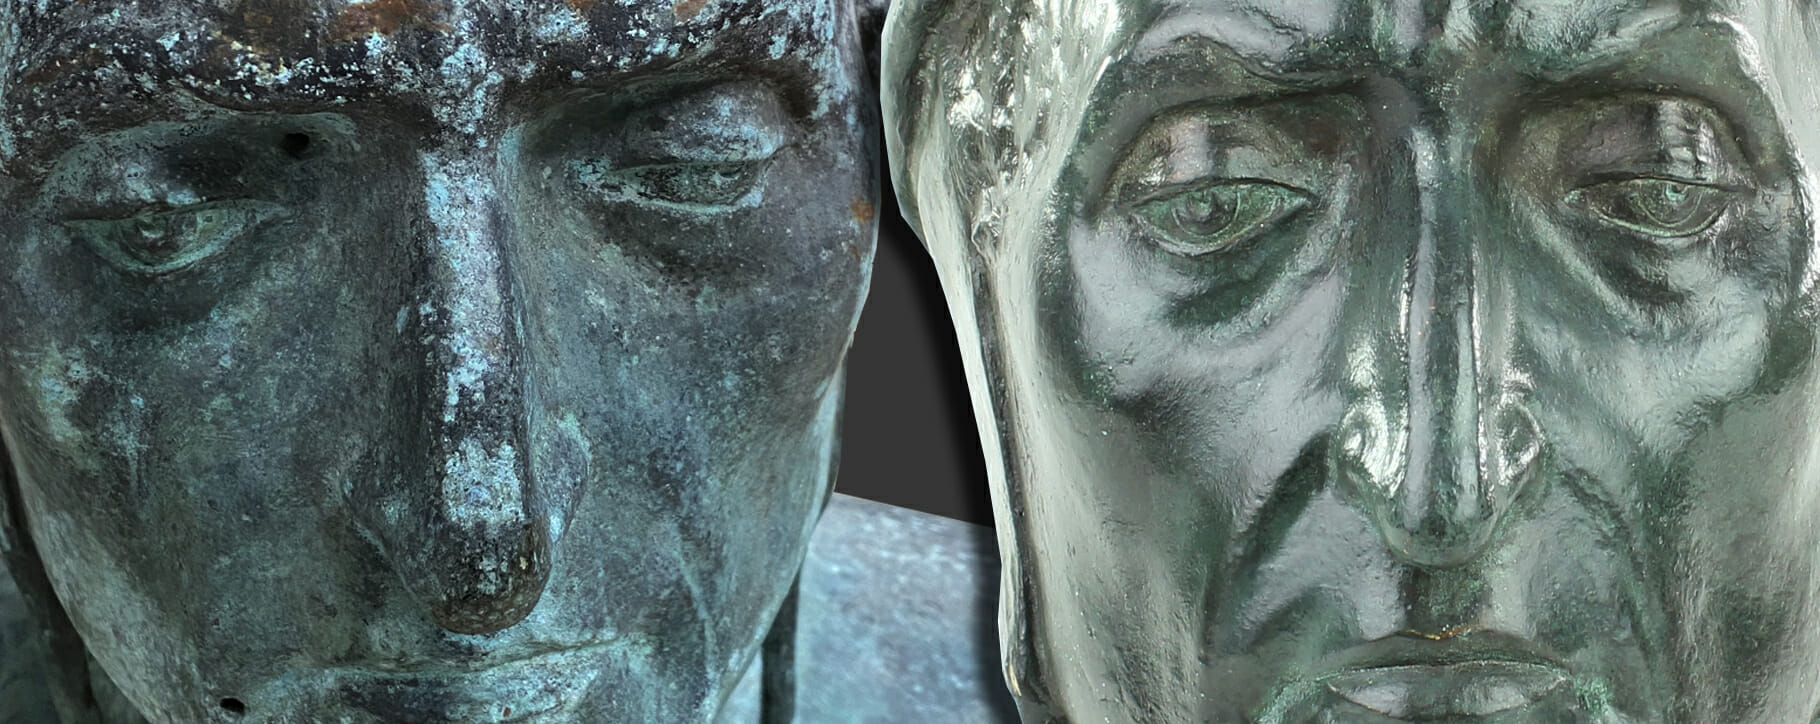 Tarnishing bronze sculpture restoration before and after